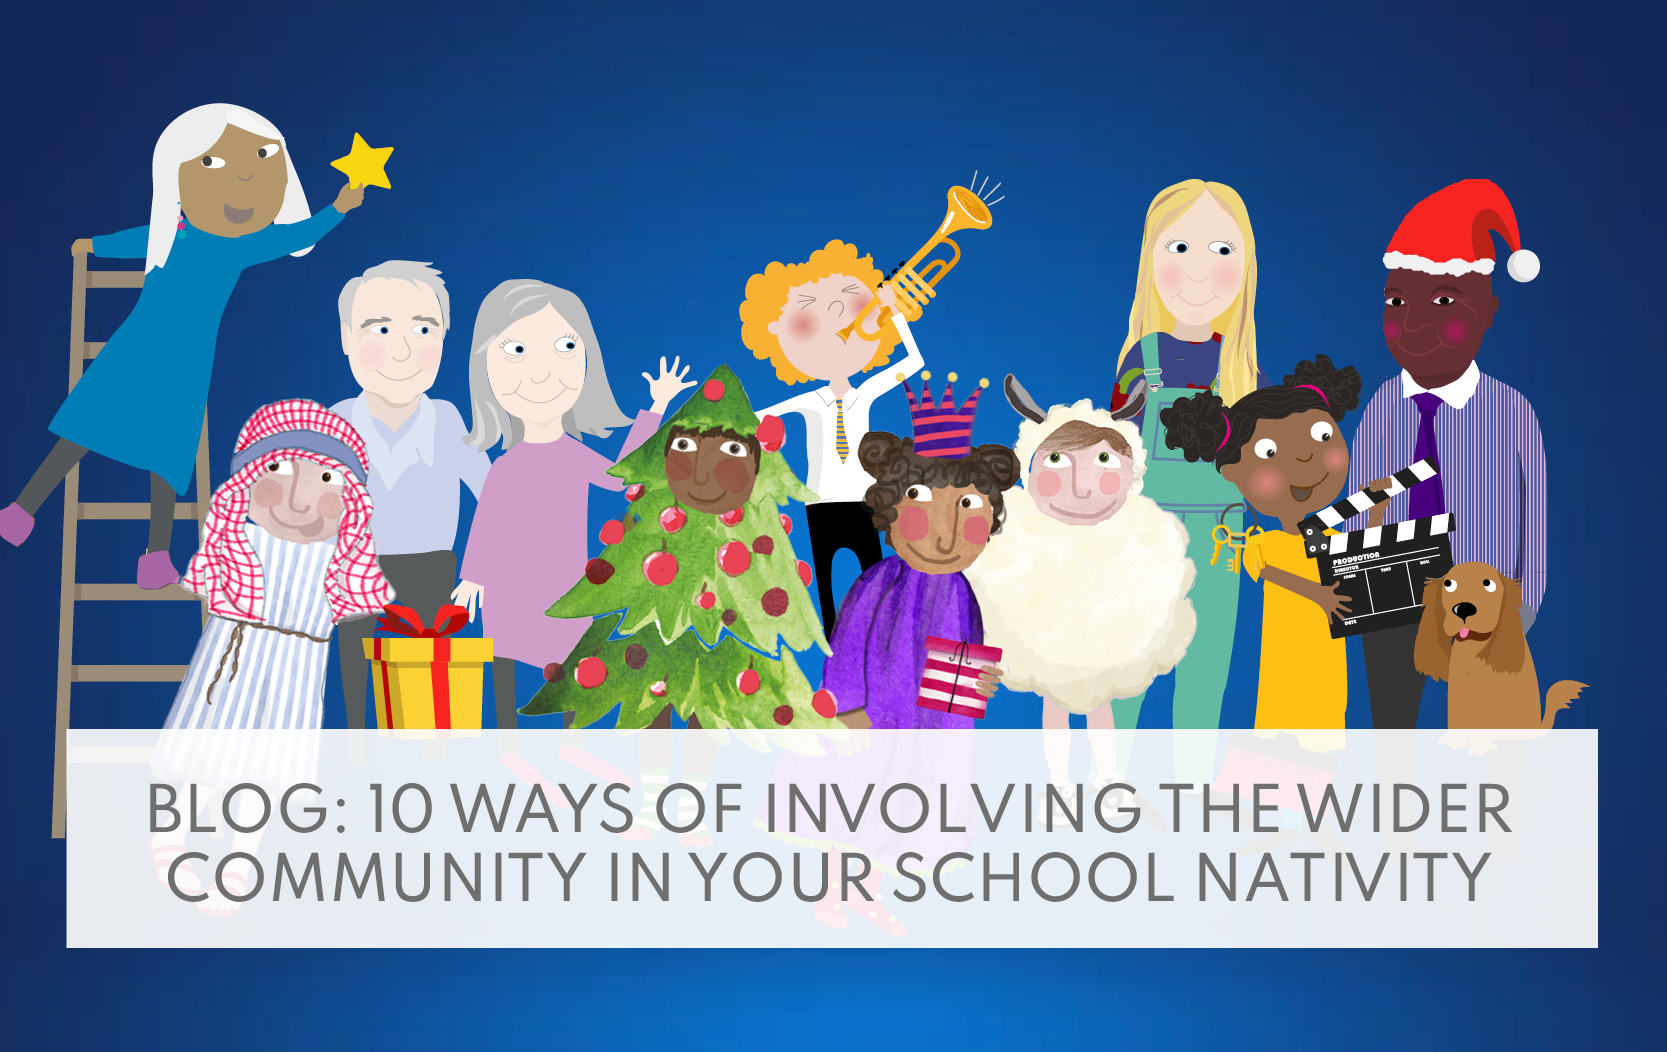 10 Great Ways Of Involving The Wider Community In Your School Nativity